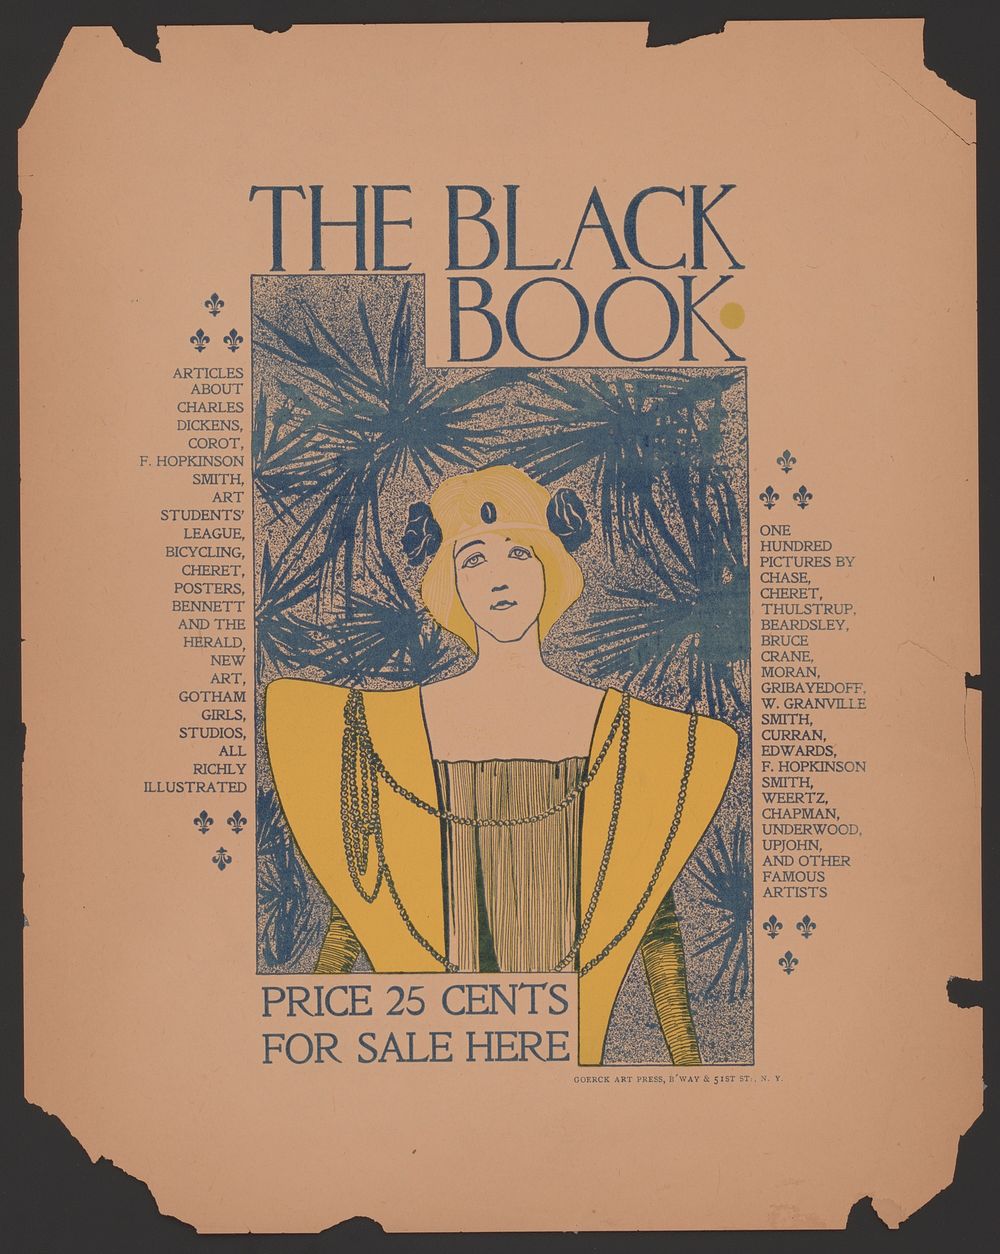 The Black Book. price 25 cents, for sale here.